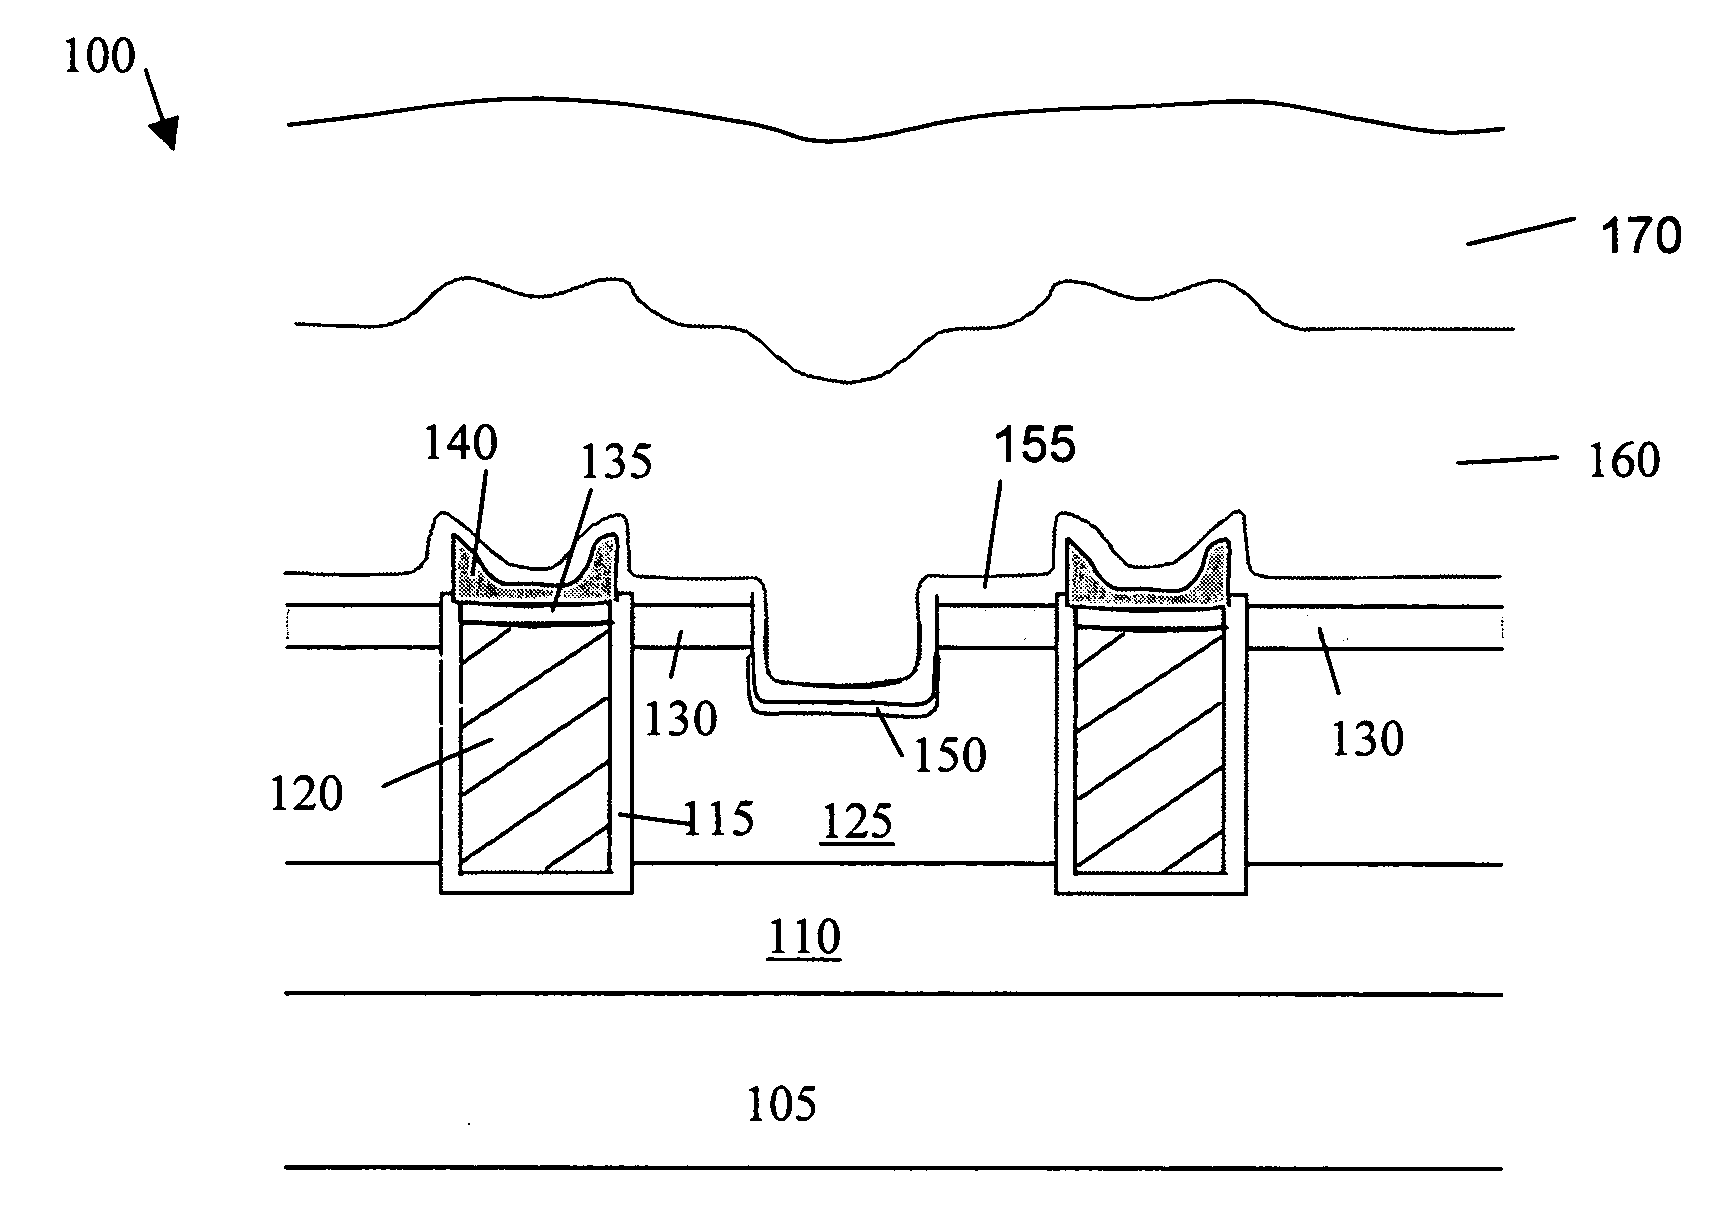 Method of fabrication and device configuration of asymmetrical DMOSFET with Schottky barrier source